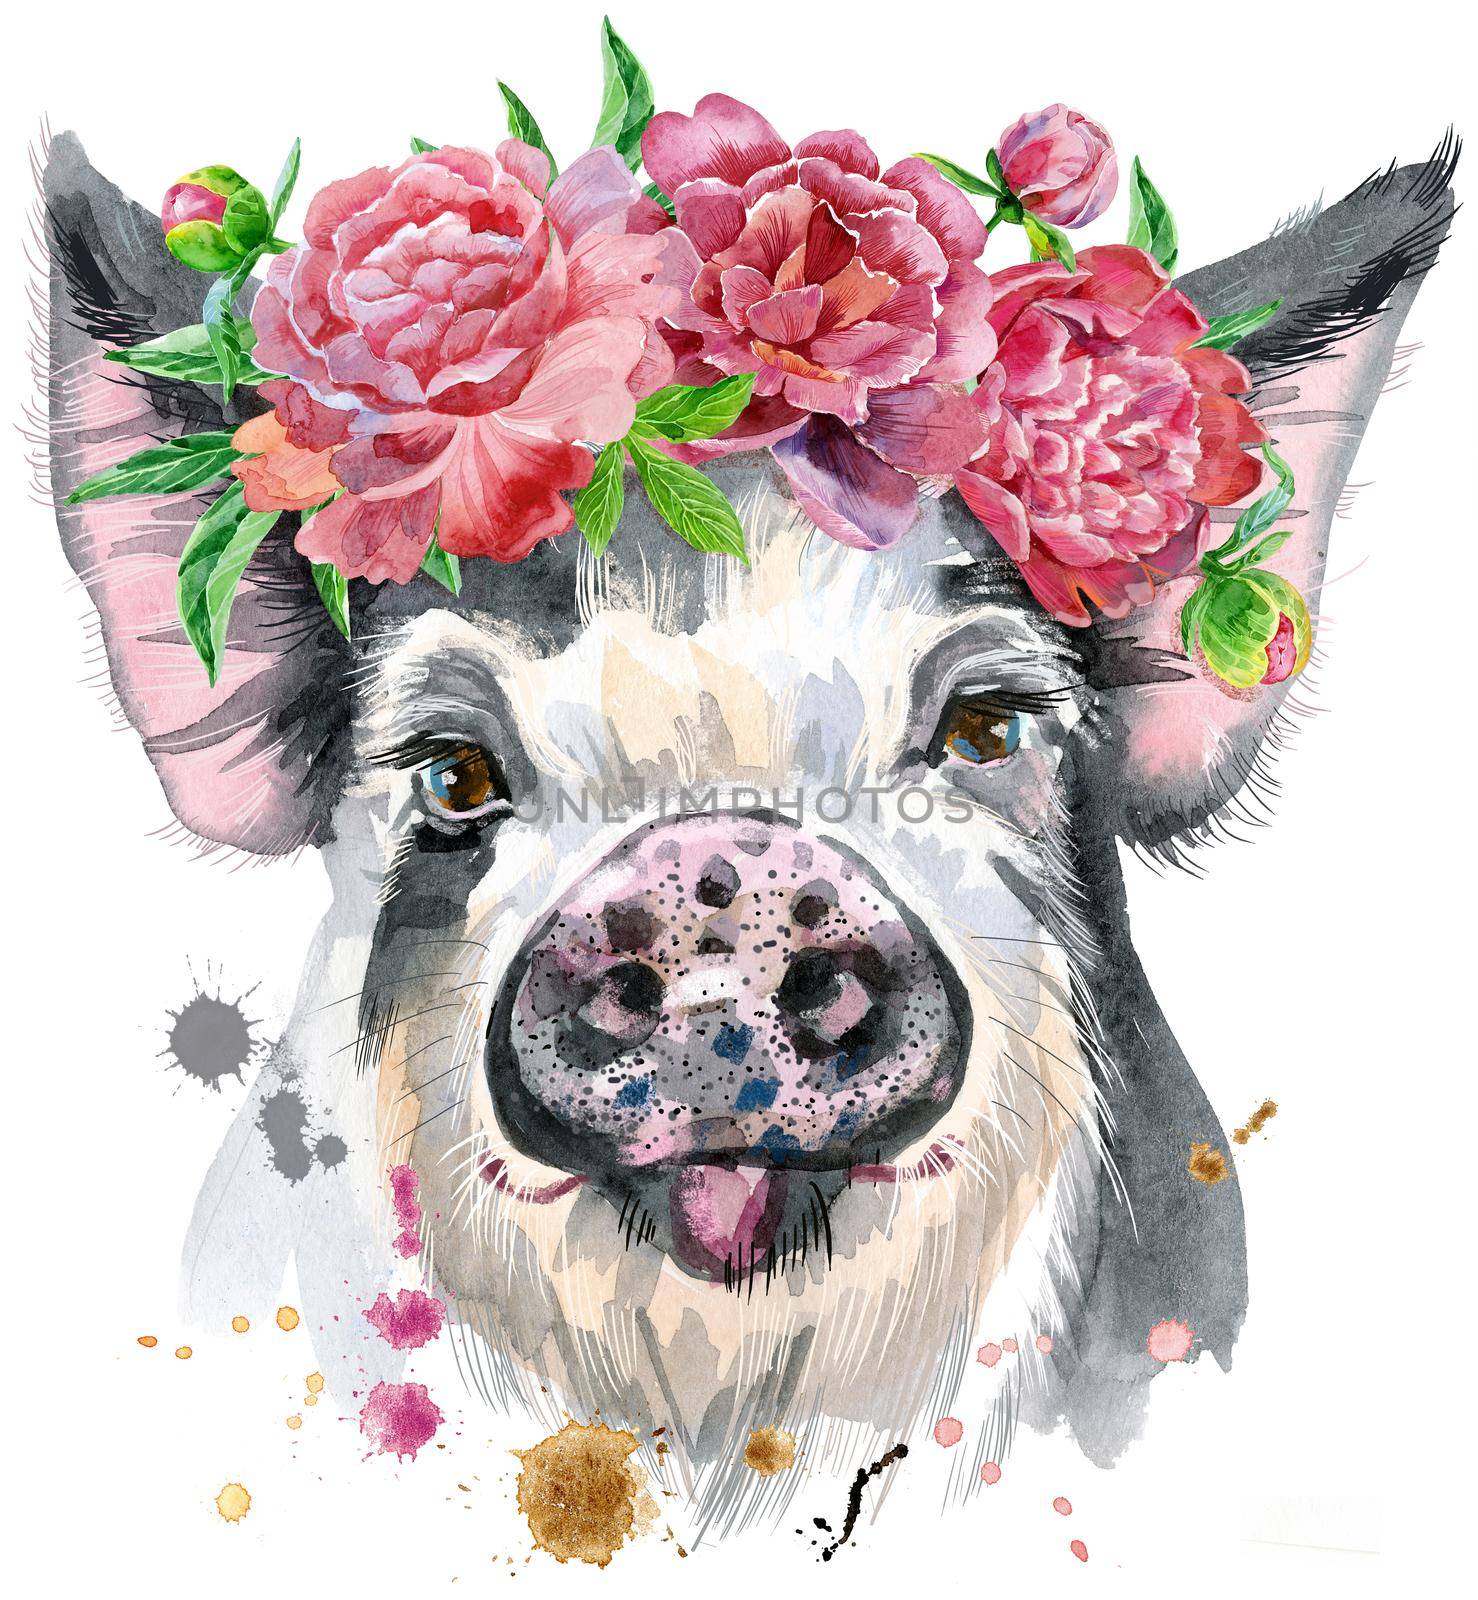 A beautiful pig in black spots in a wreath of peonies. Flowers. Watercolor illustration with splashes.